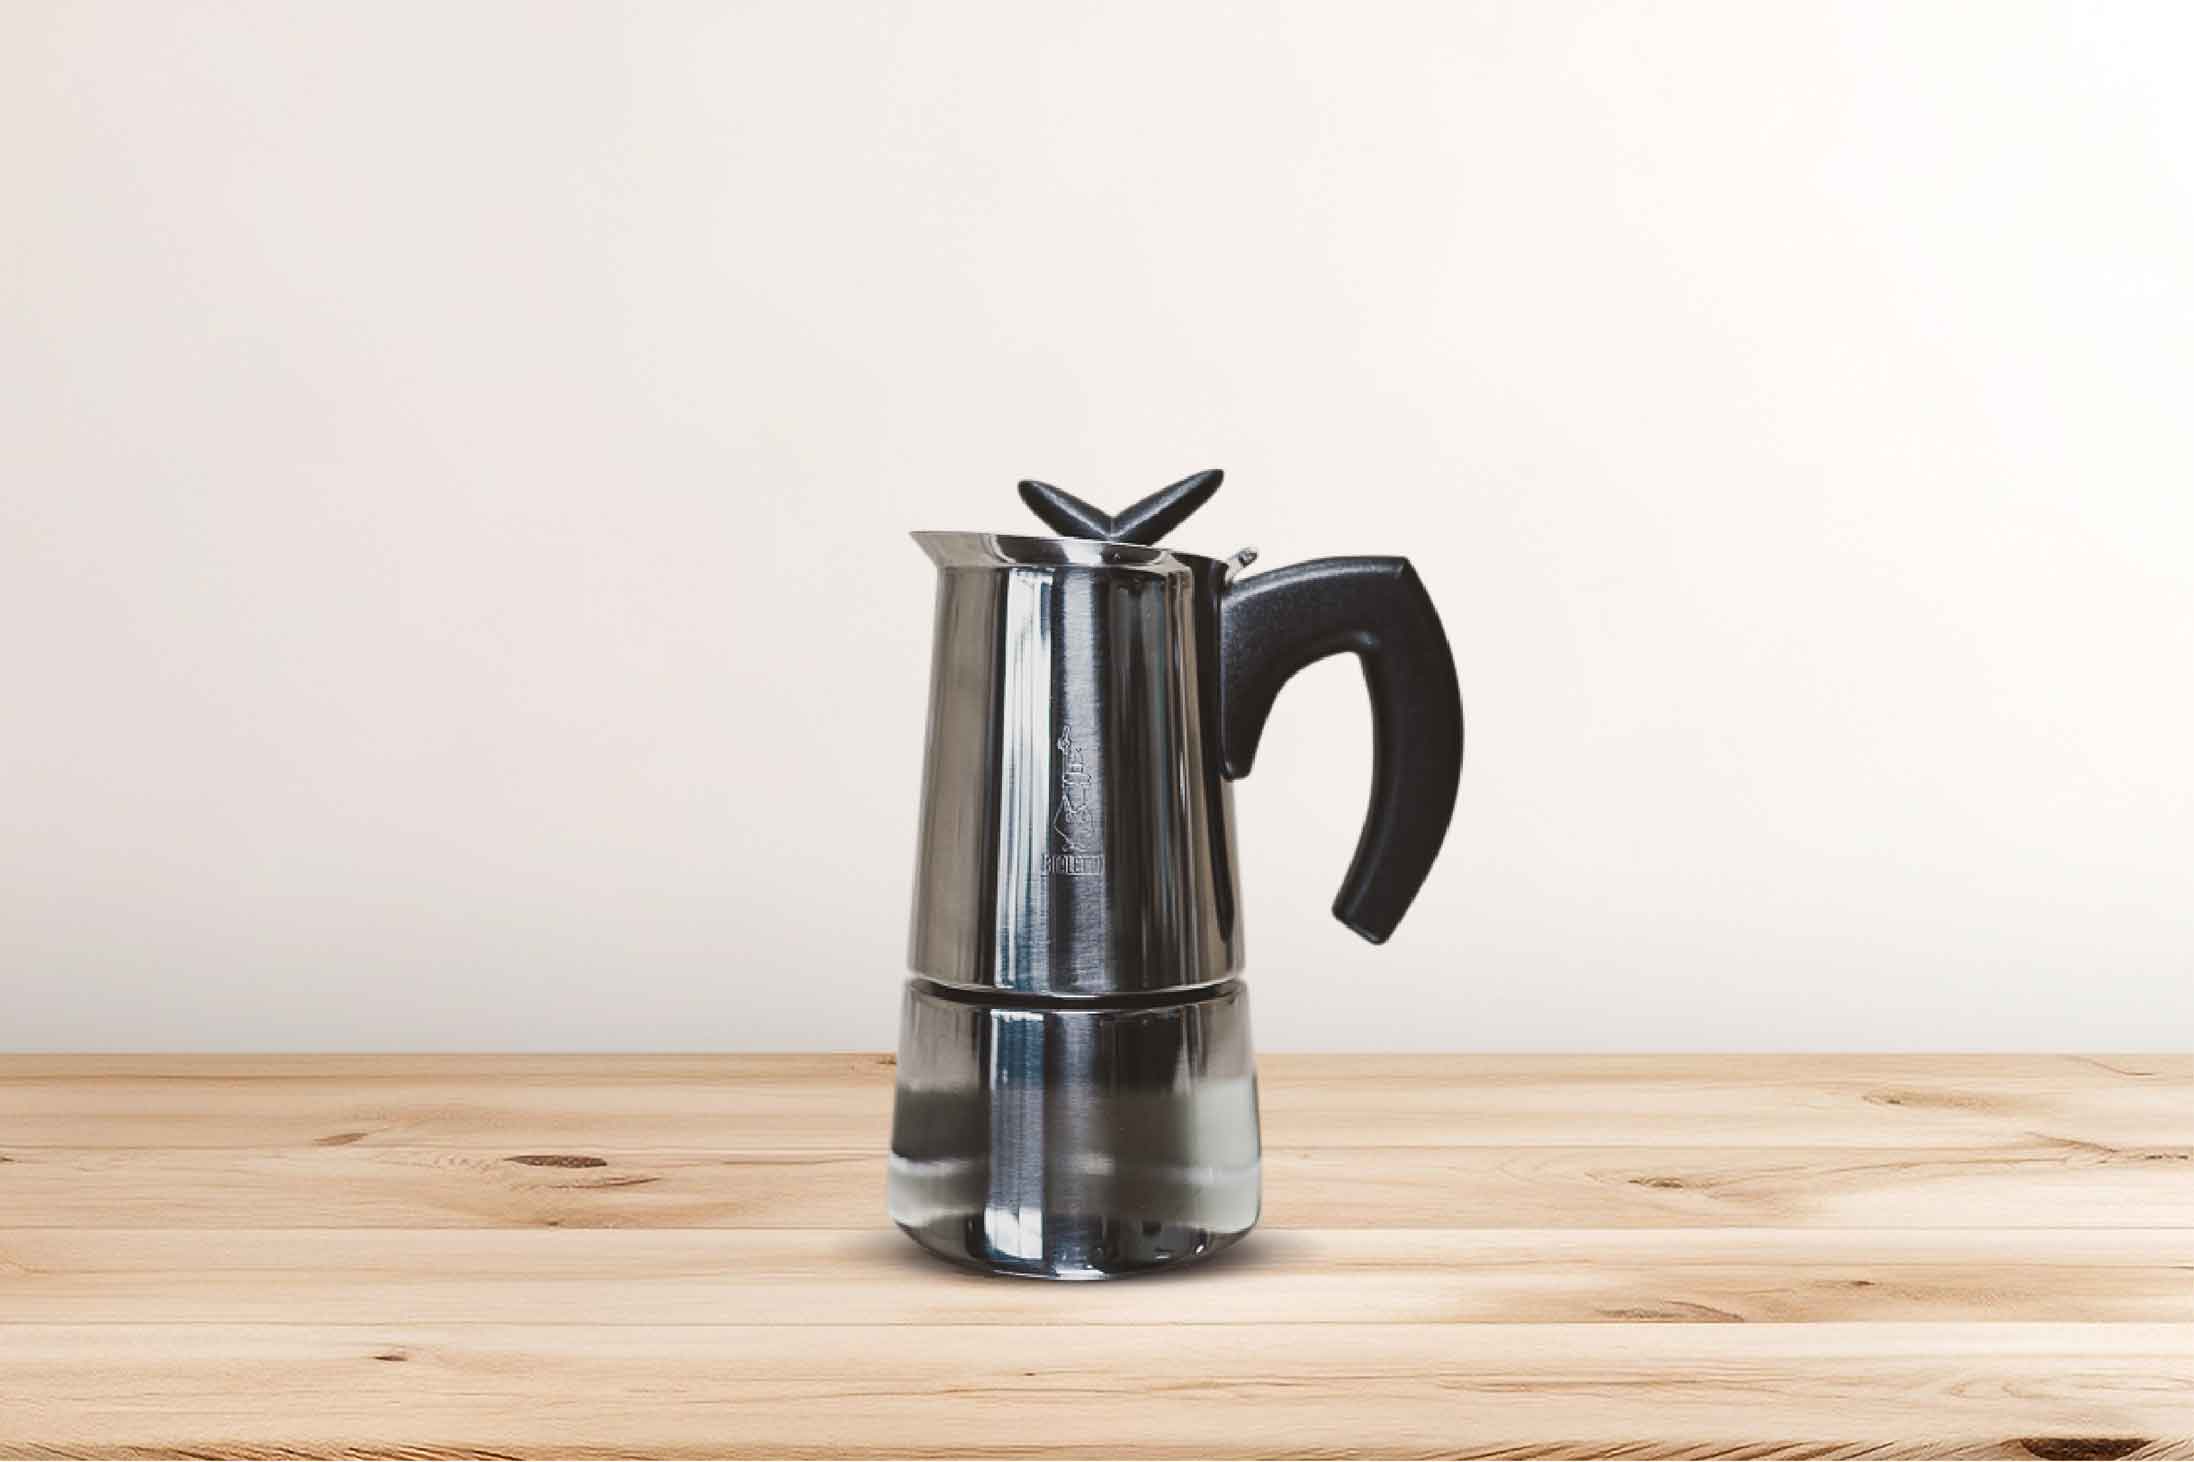 Bialetti Stainless steel Stovetop 4 cup moka pot